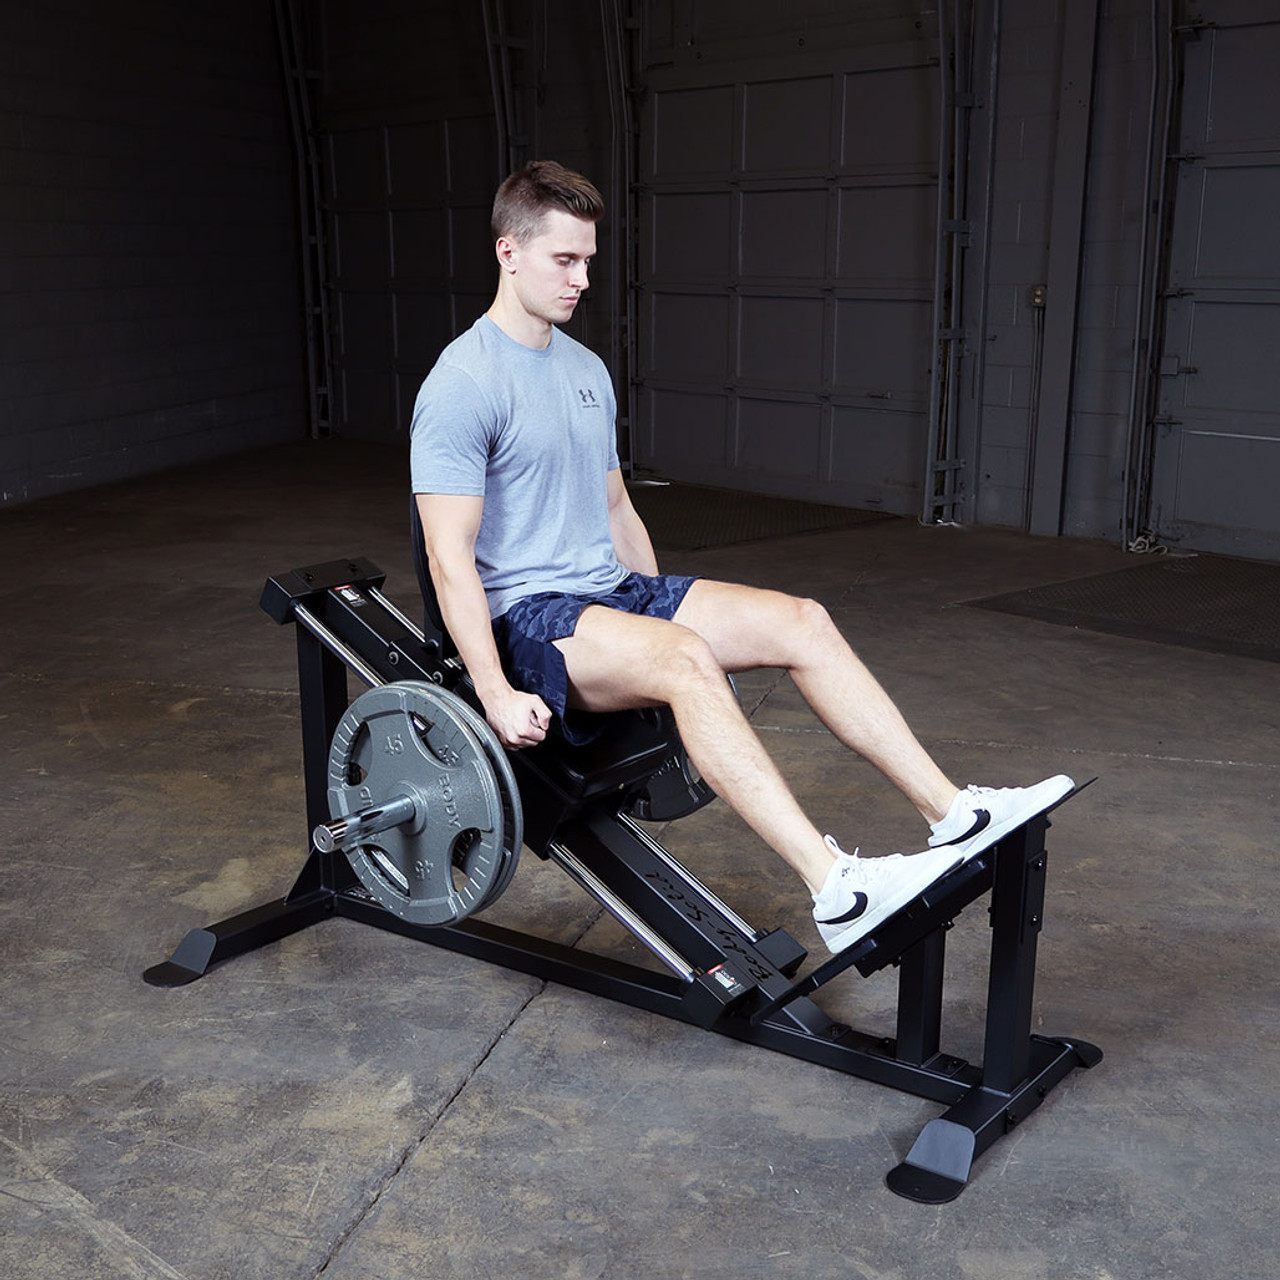 How to Do a Leg Press Machine Exercise to Build Lower Body Muscle